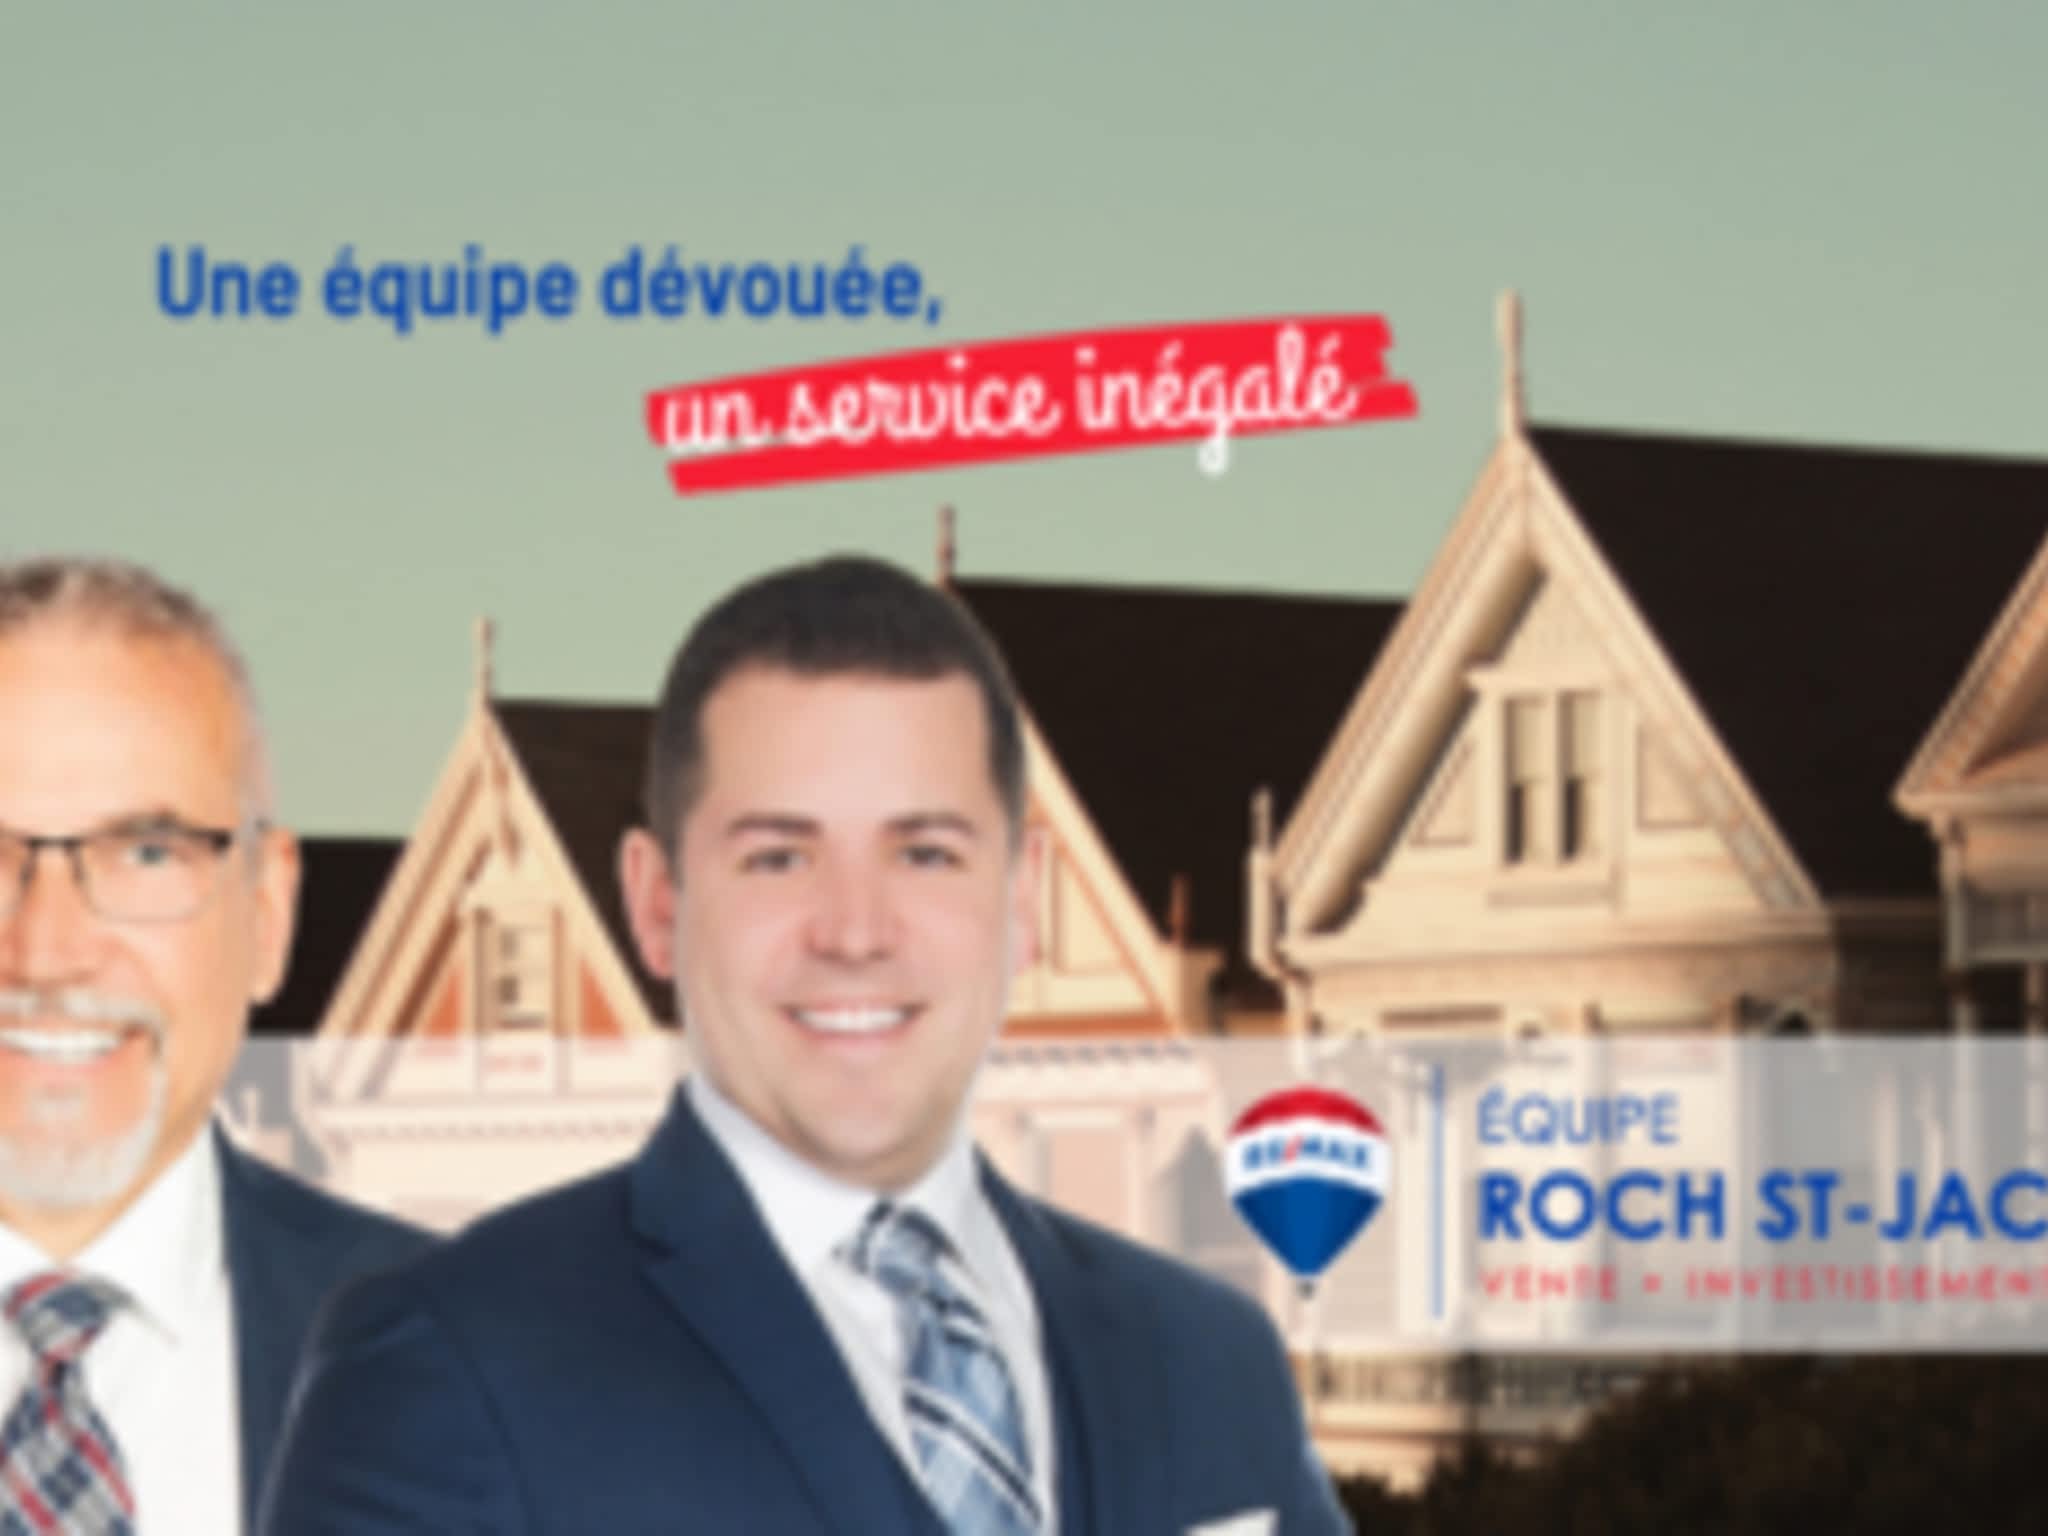 photo Equipe Roch St.Jacques Courtier Immobilier